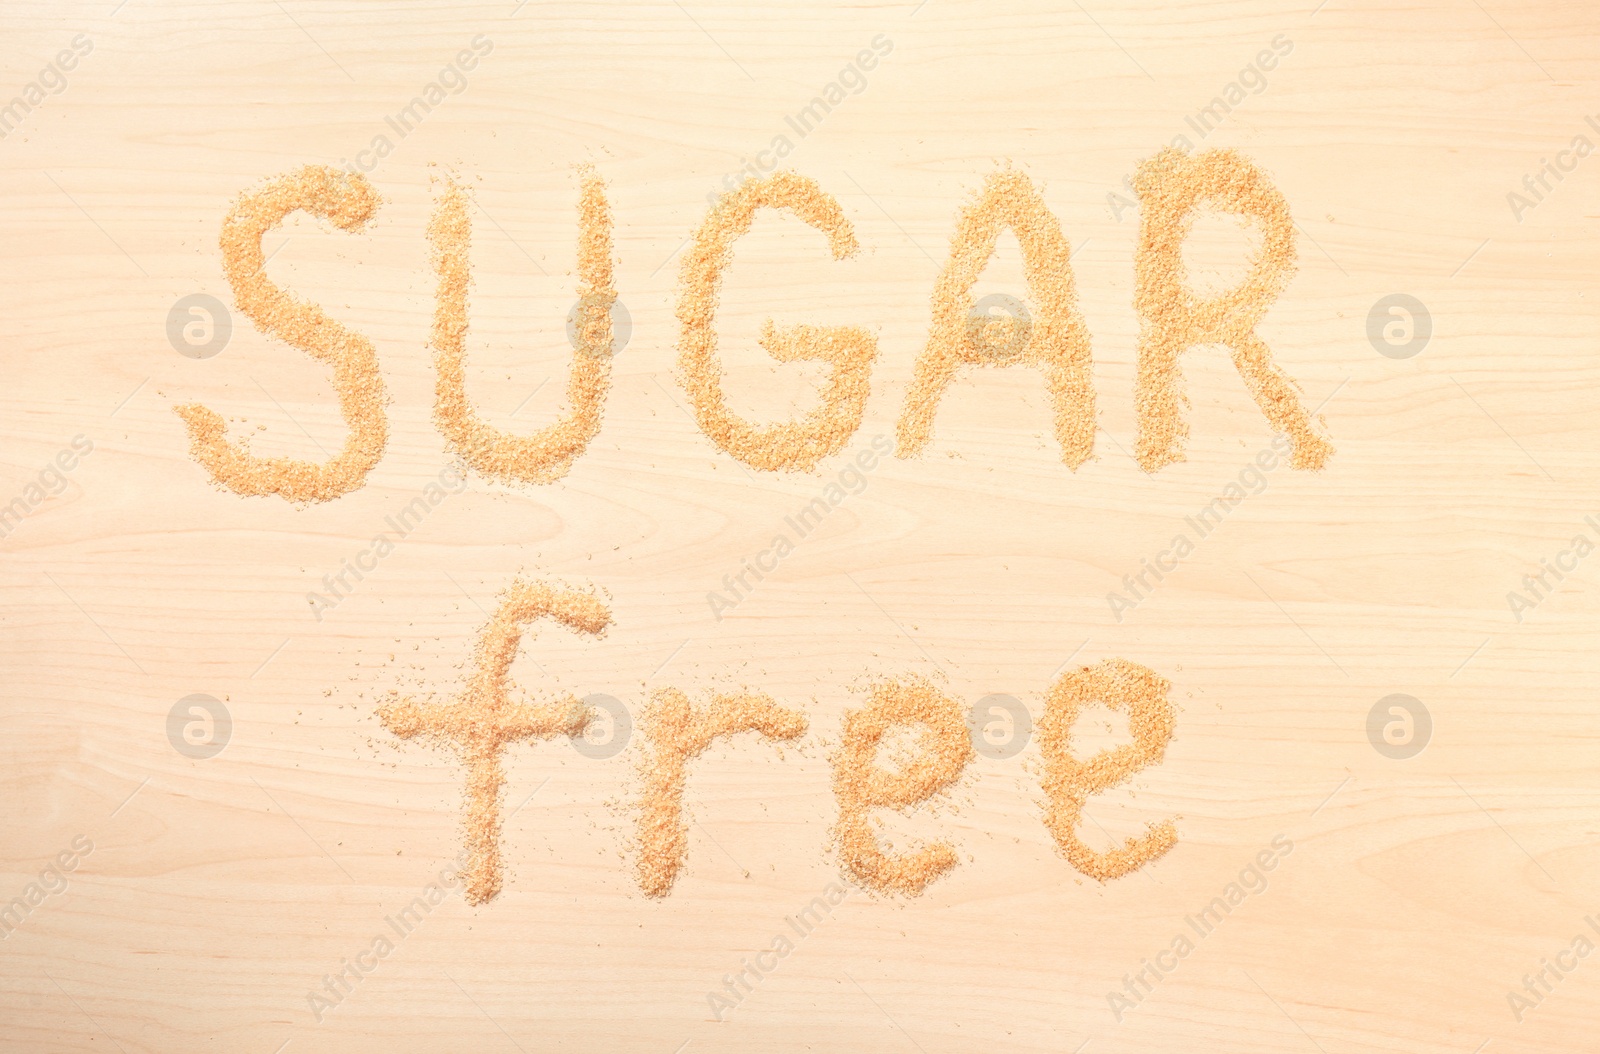 Photo of Phrase SUGAR FREE on wooden background